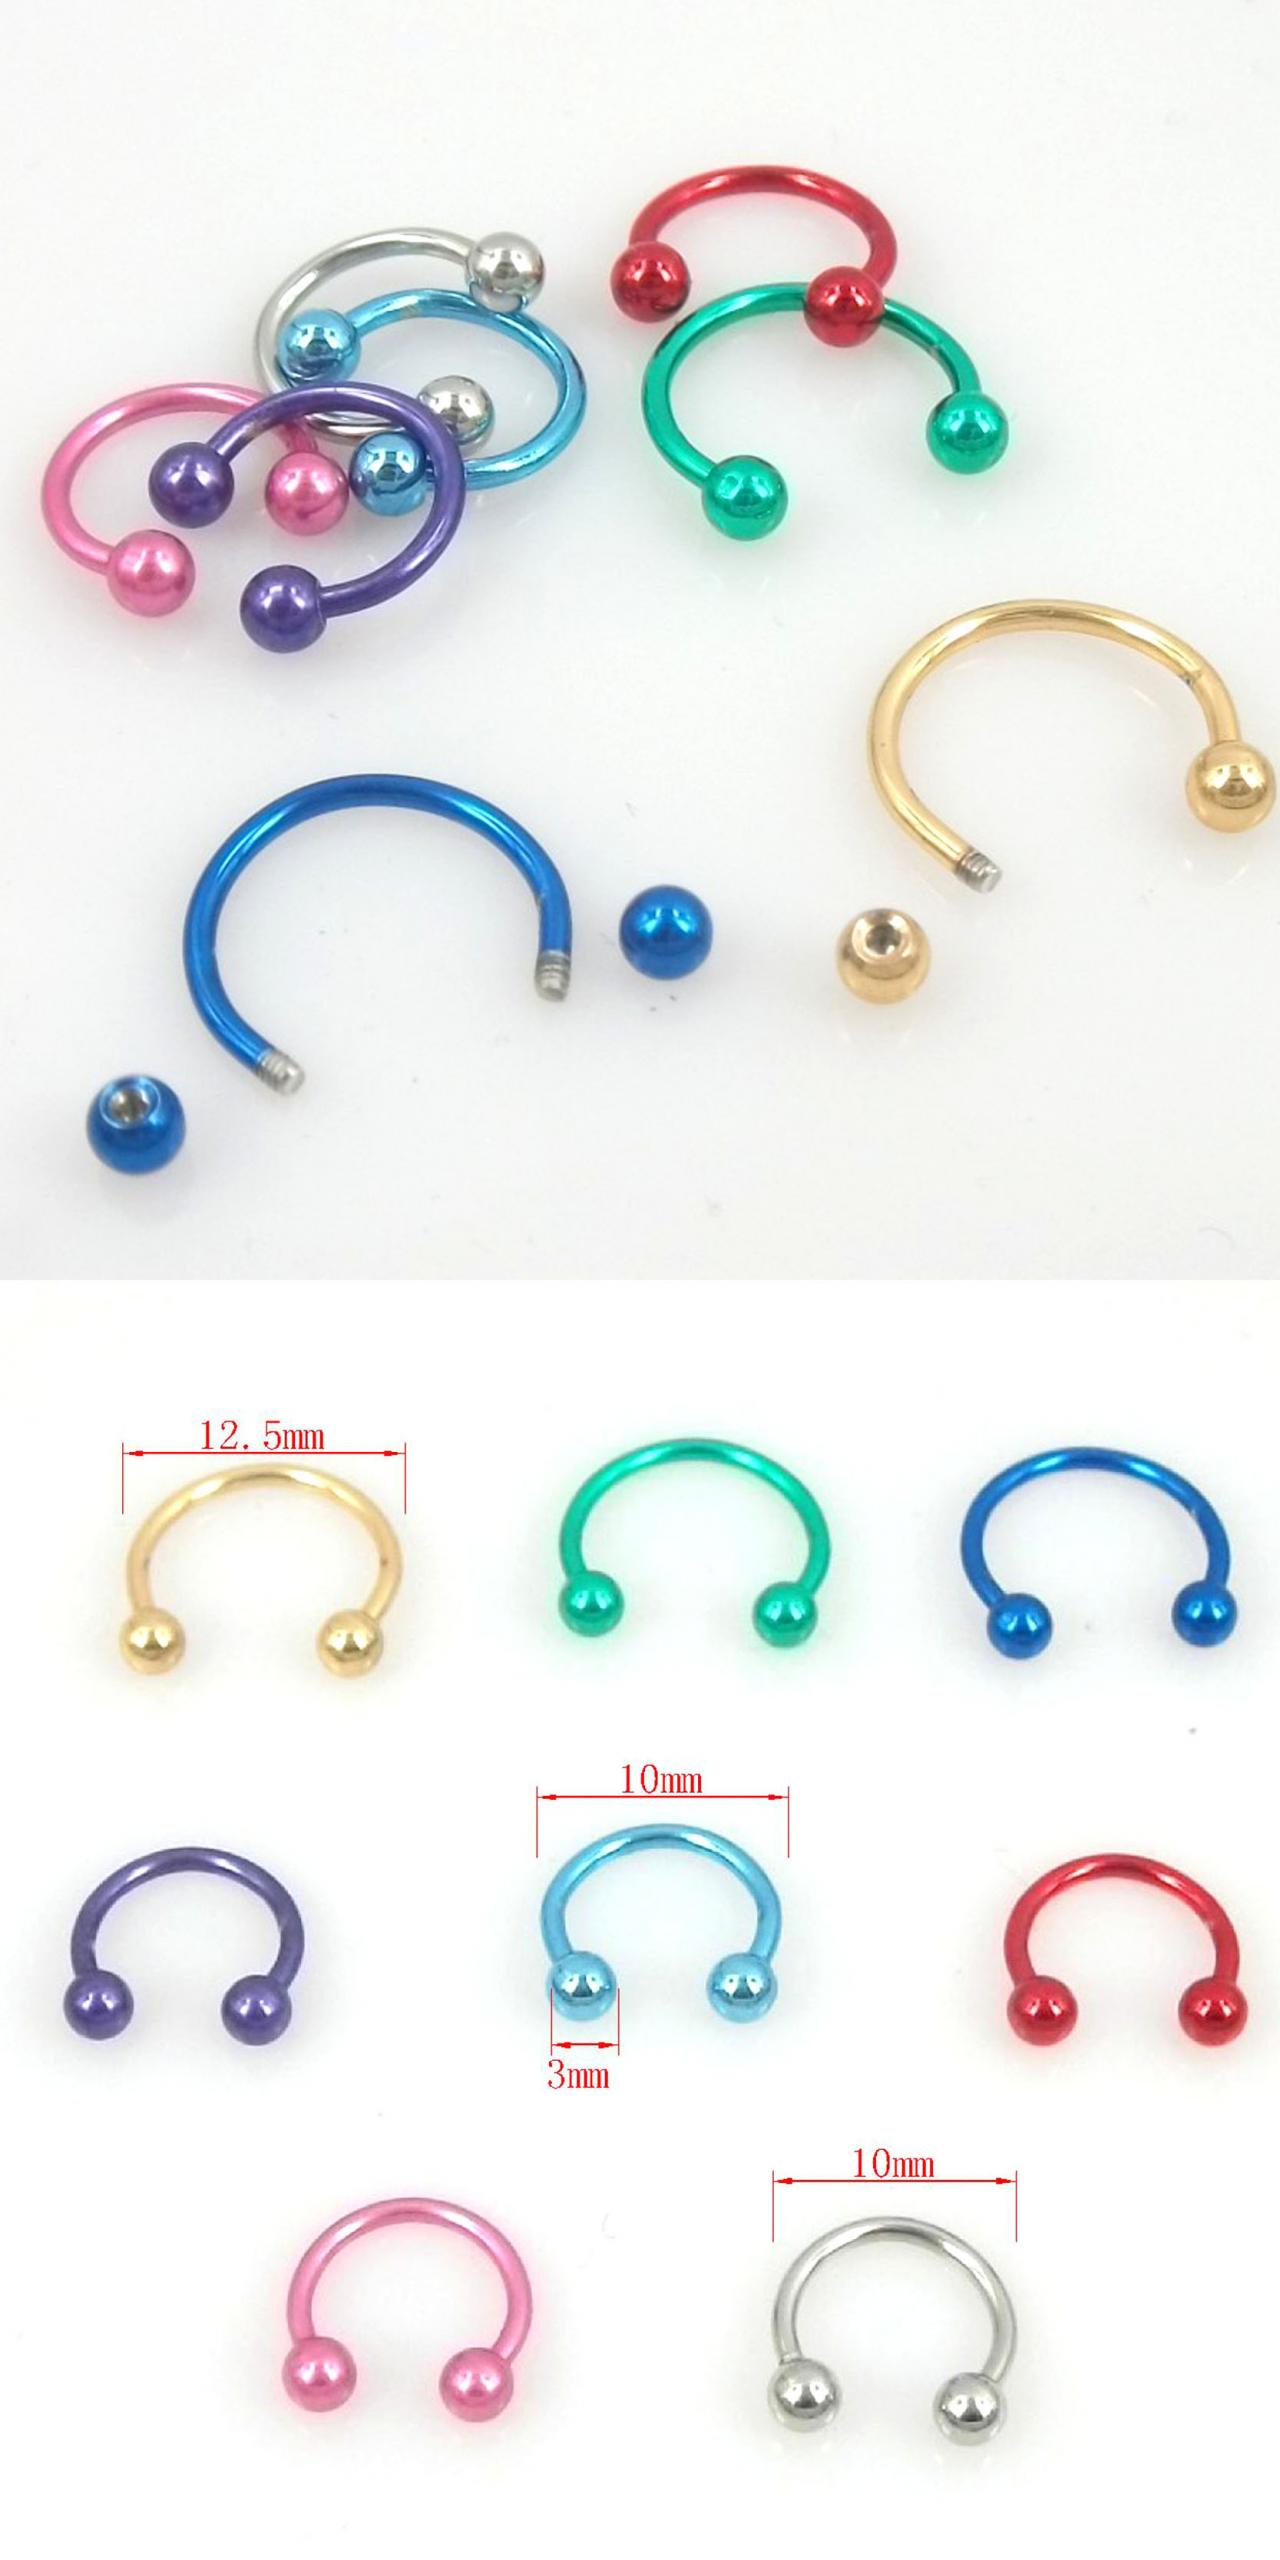 8pcs Colorful Ball Nose Ring Septum Studs Stainless Steel Hoop Body